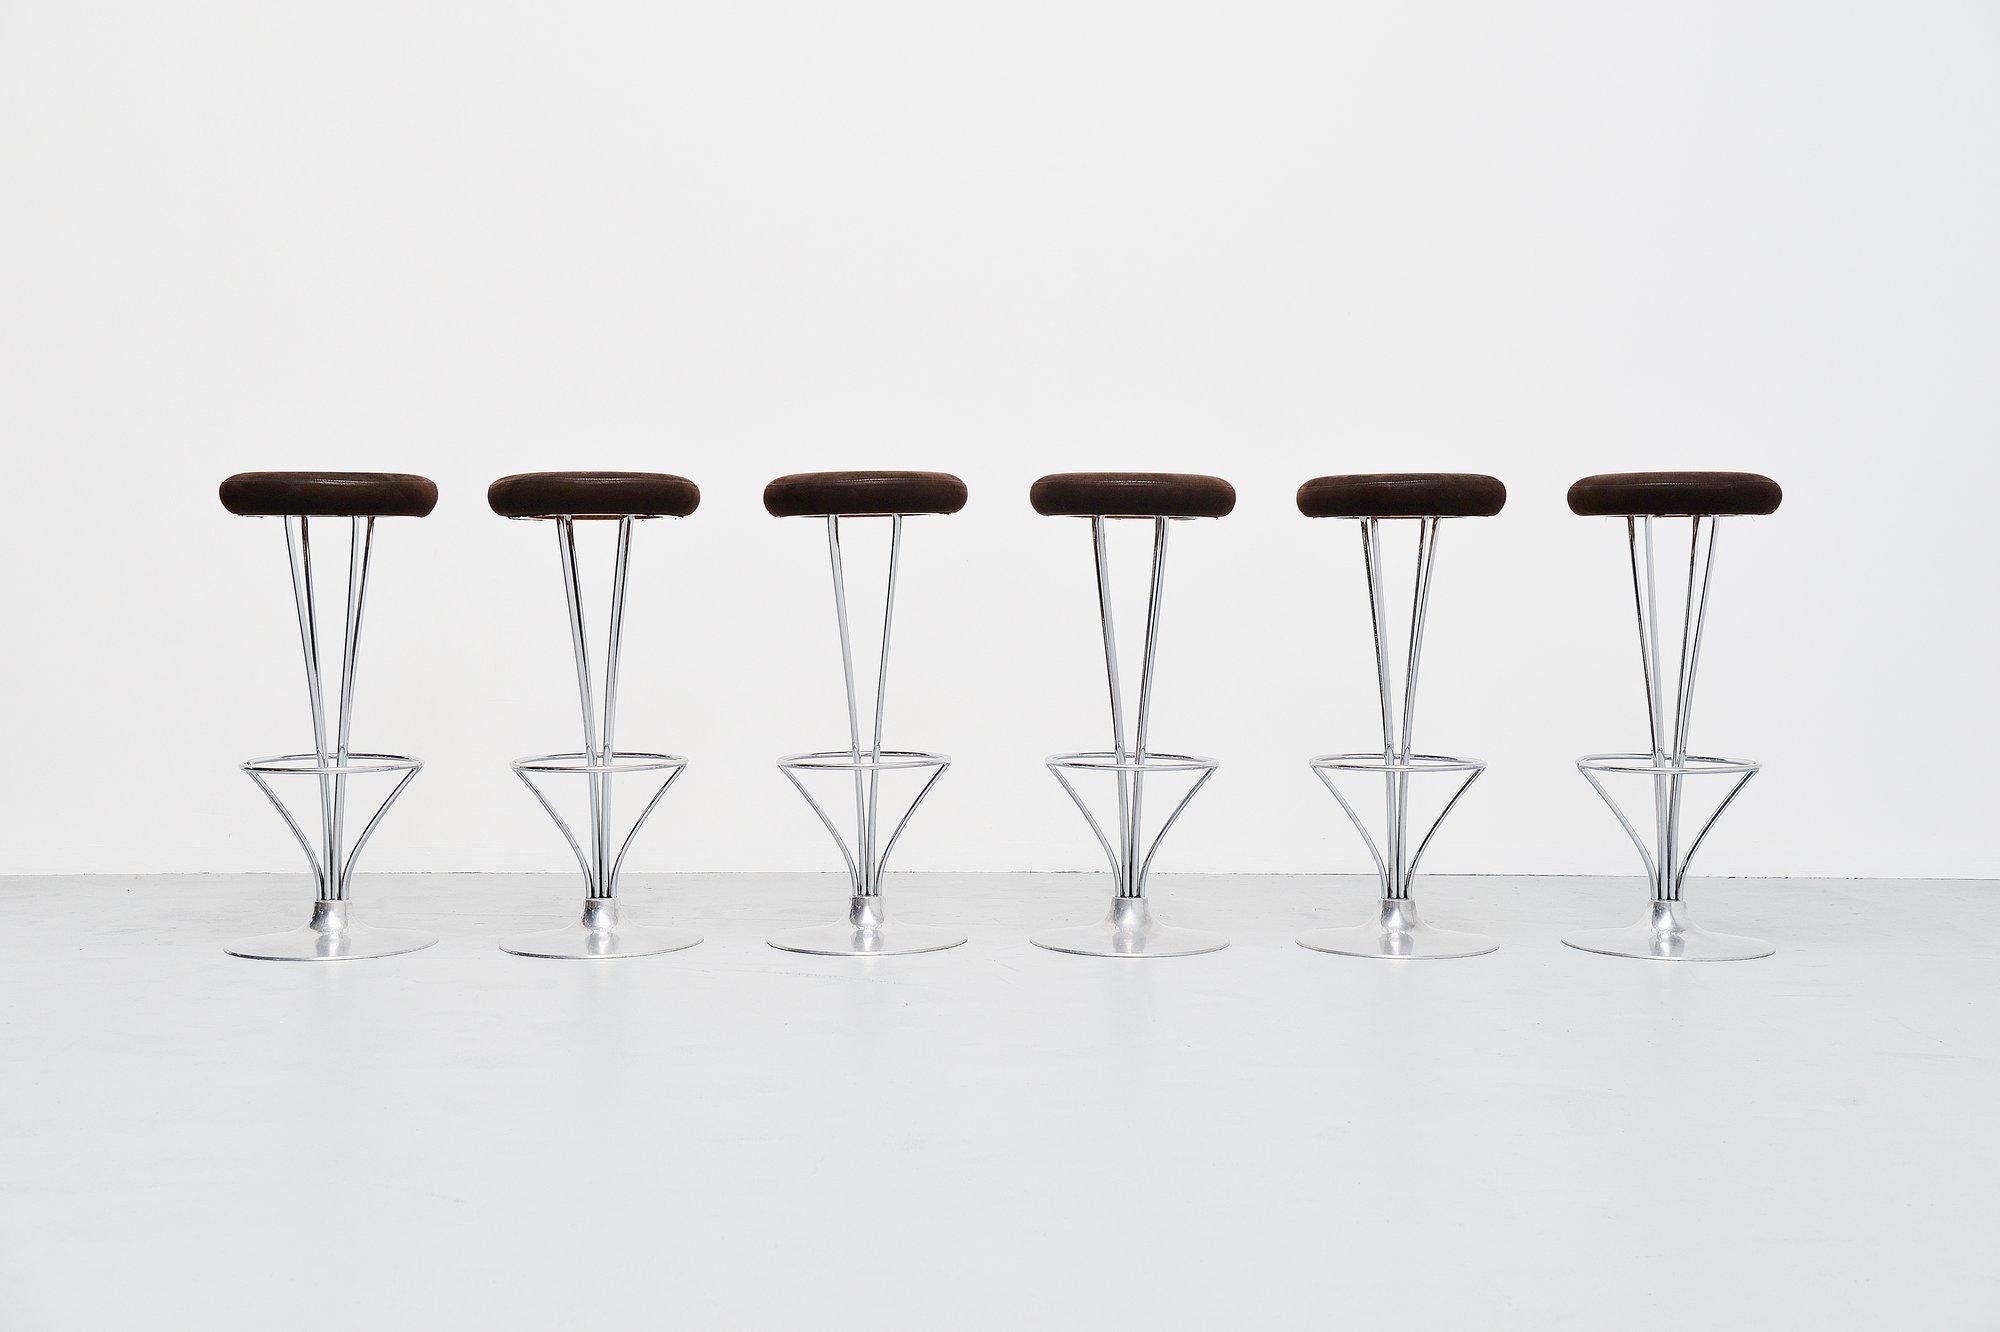 This is for a very nice set of six bar stools, designed by Piet Hein for Fritz Hansen, Denmark 1965. These stools have chrome-plated frames and a brushed aluminium base. These are upholstered in brown suede and it has a nice patina from age and